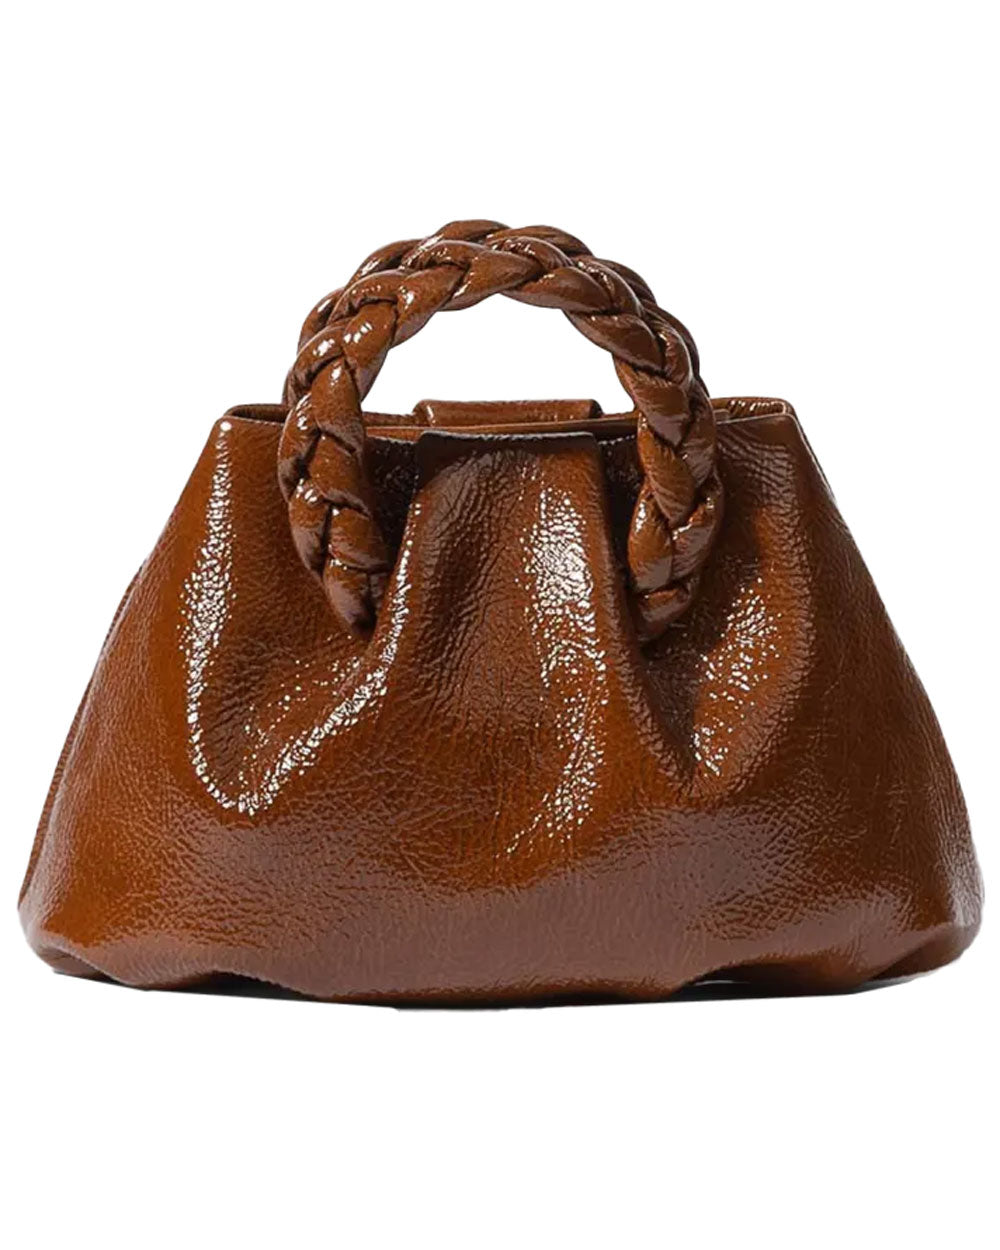 Bombon Crinkled Glossy Top Handle Bag in Walnut